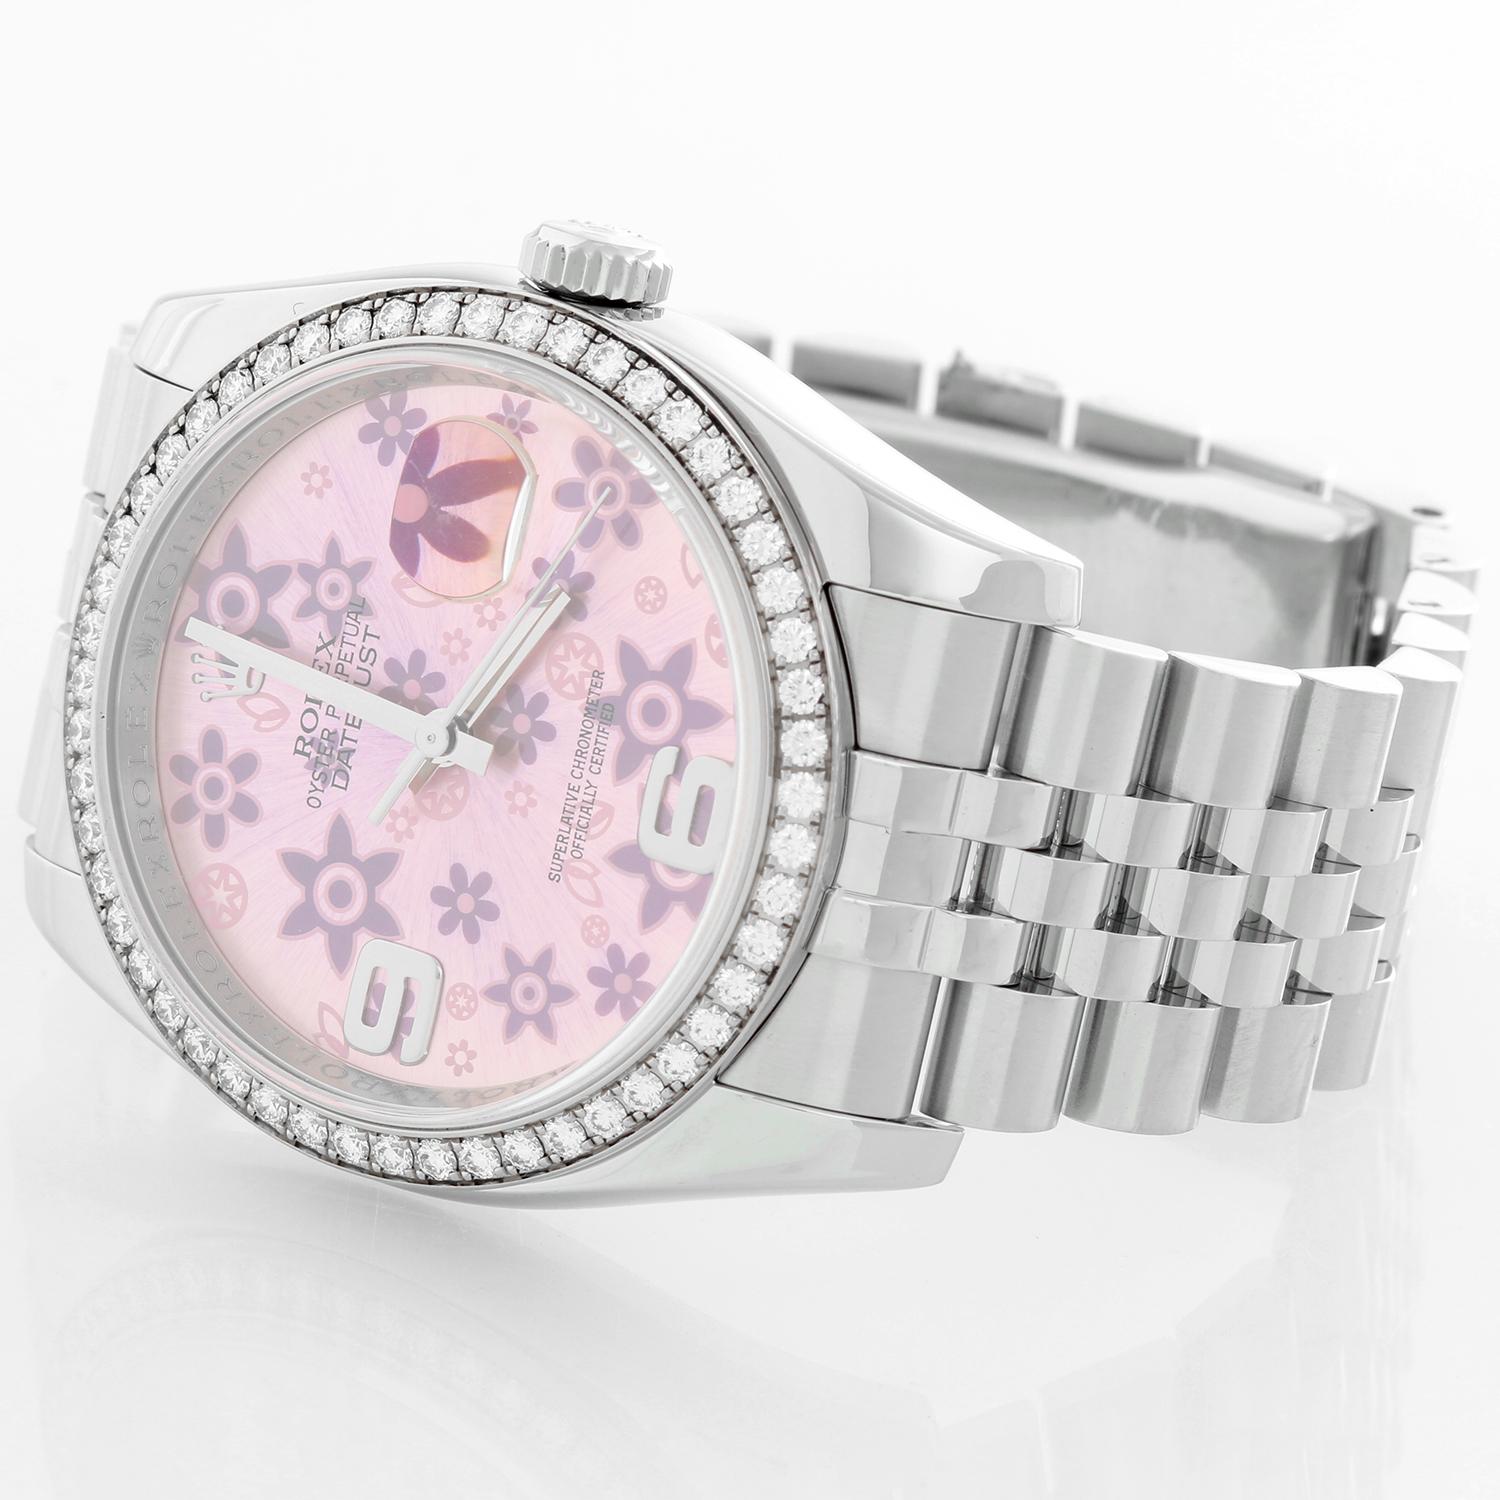 Rolex Datejust Diamond Bezel Pink Floral Dial Men's Steel Watch 116244 - Automatic winding, 31 jewels, Quickset, sapphire crystal. Stainless steel case with factory 52 diamond and 18k white gold bezel  (36mm diameter). Pink Floral dial. Stainless